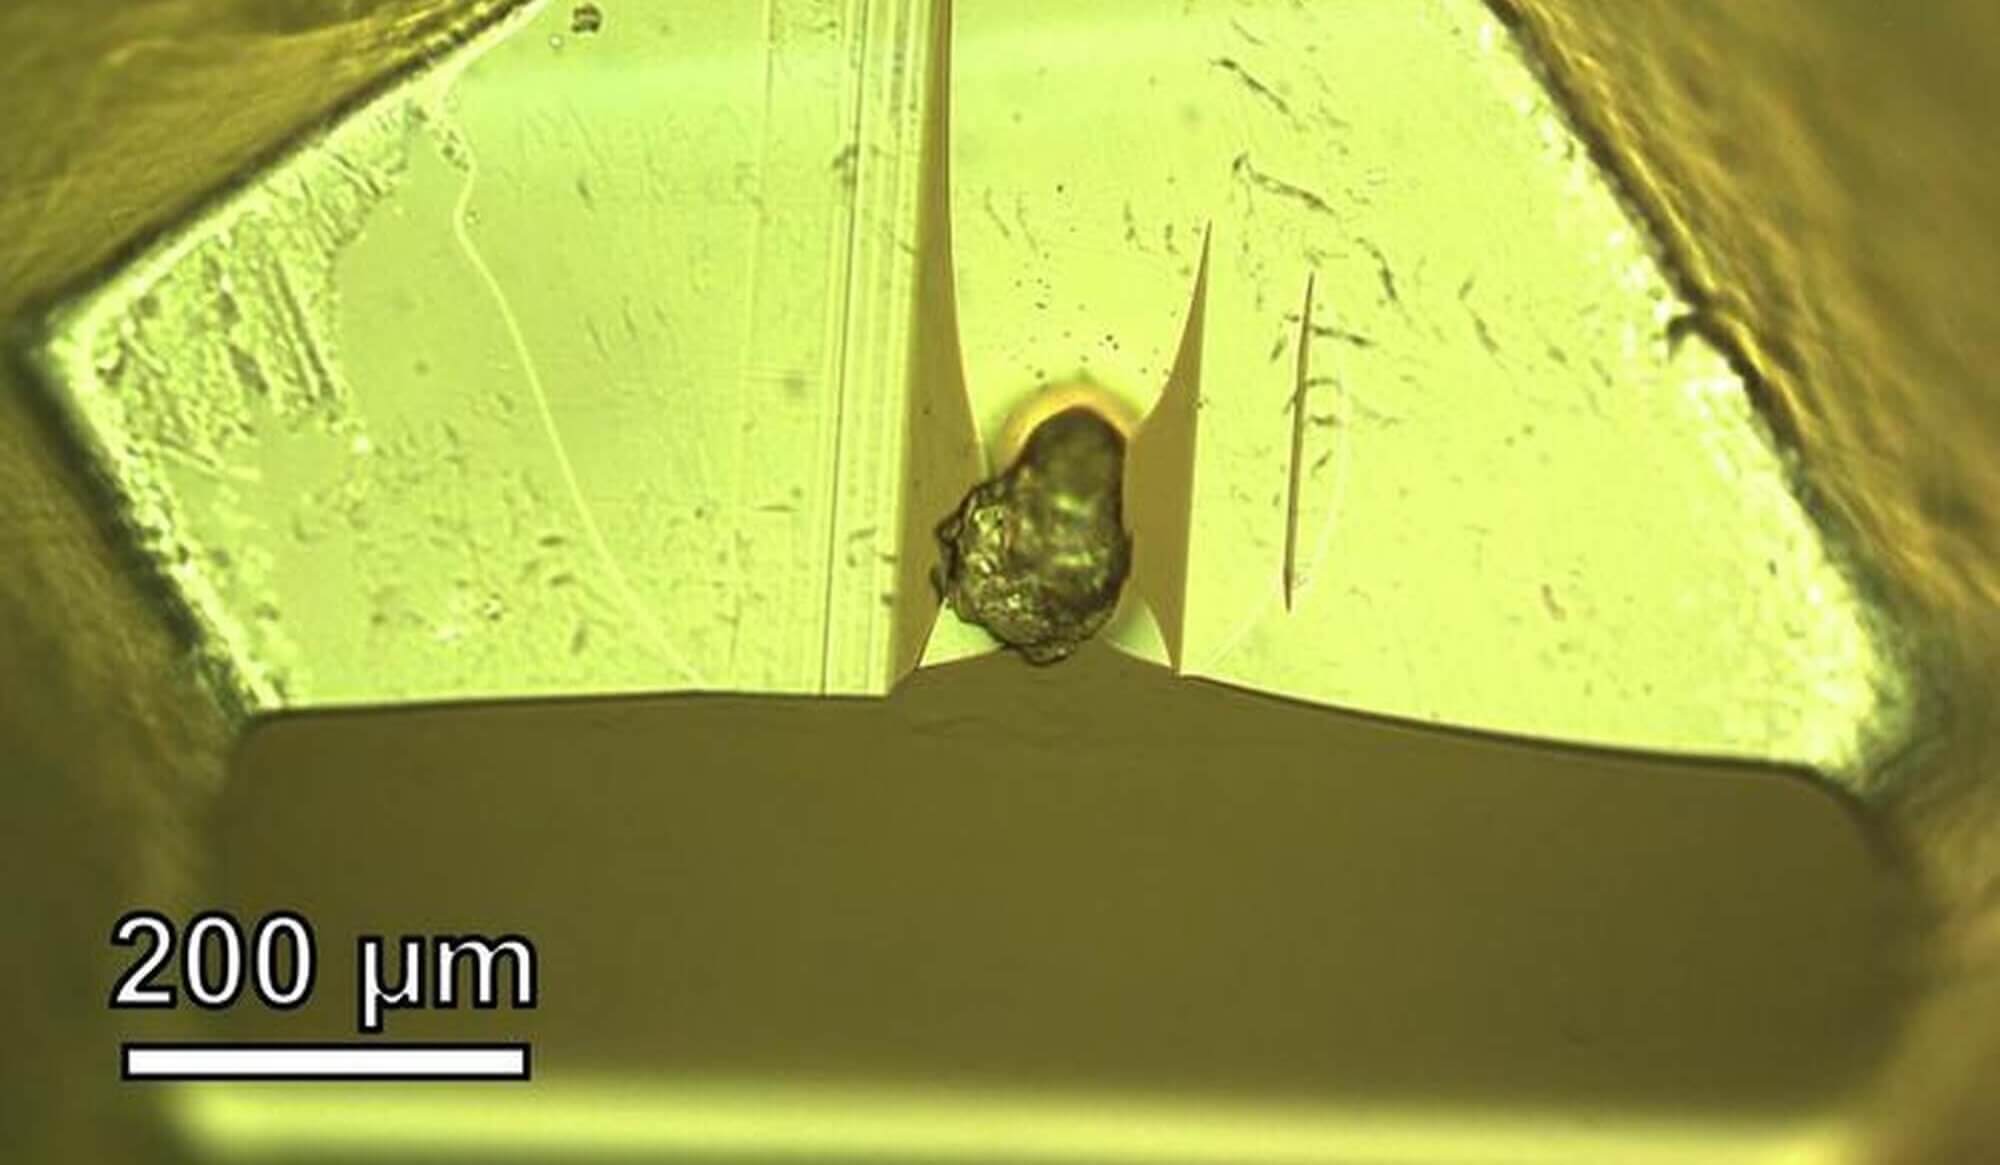 In the lab, researchers embedded the dust particle from asteroid Itokawa in epoxy resin to prepare it for thin sectioning. The scale indicates 200 micrometers, about the width of two or three human hairs placed side by side.